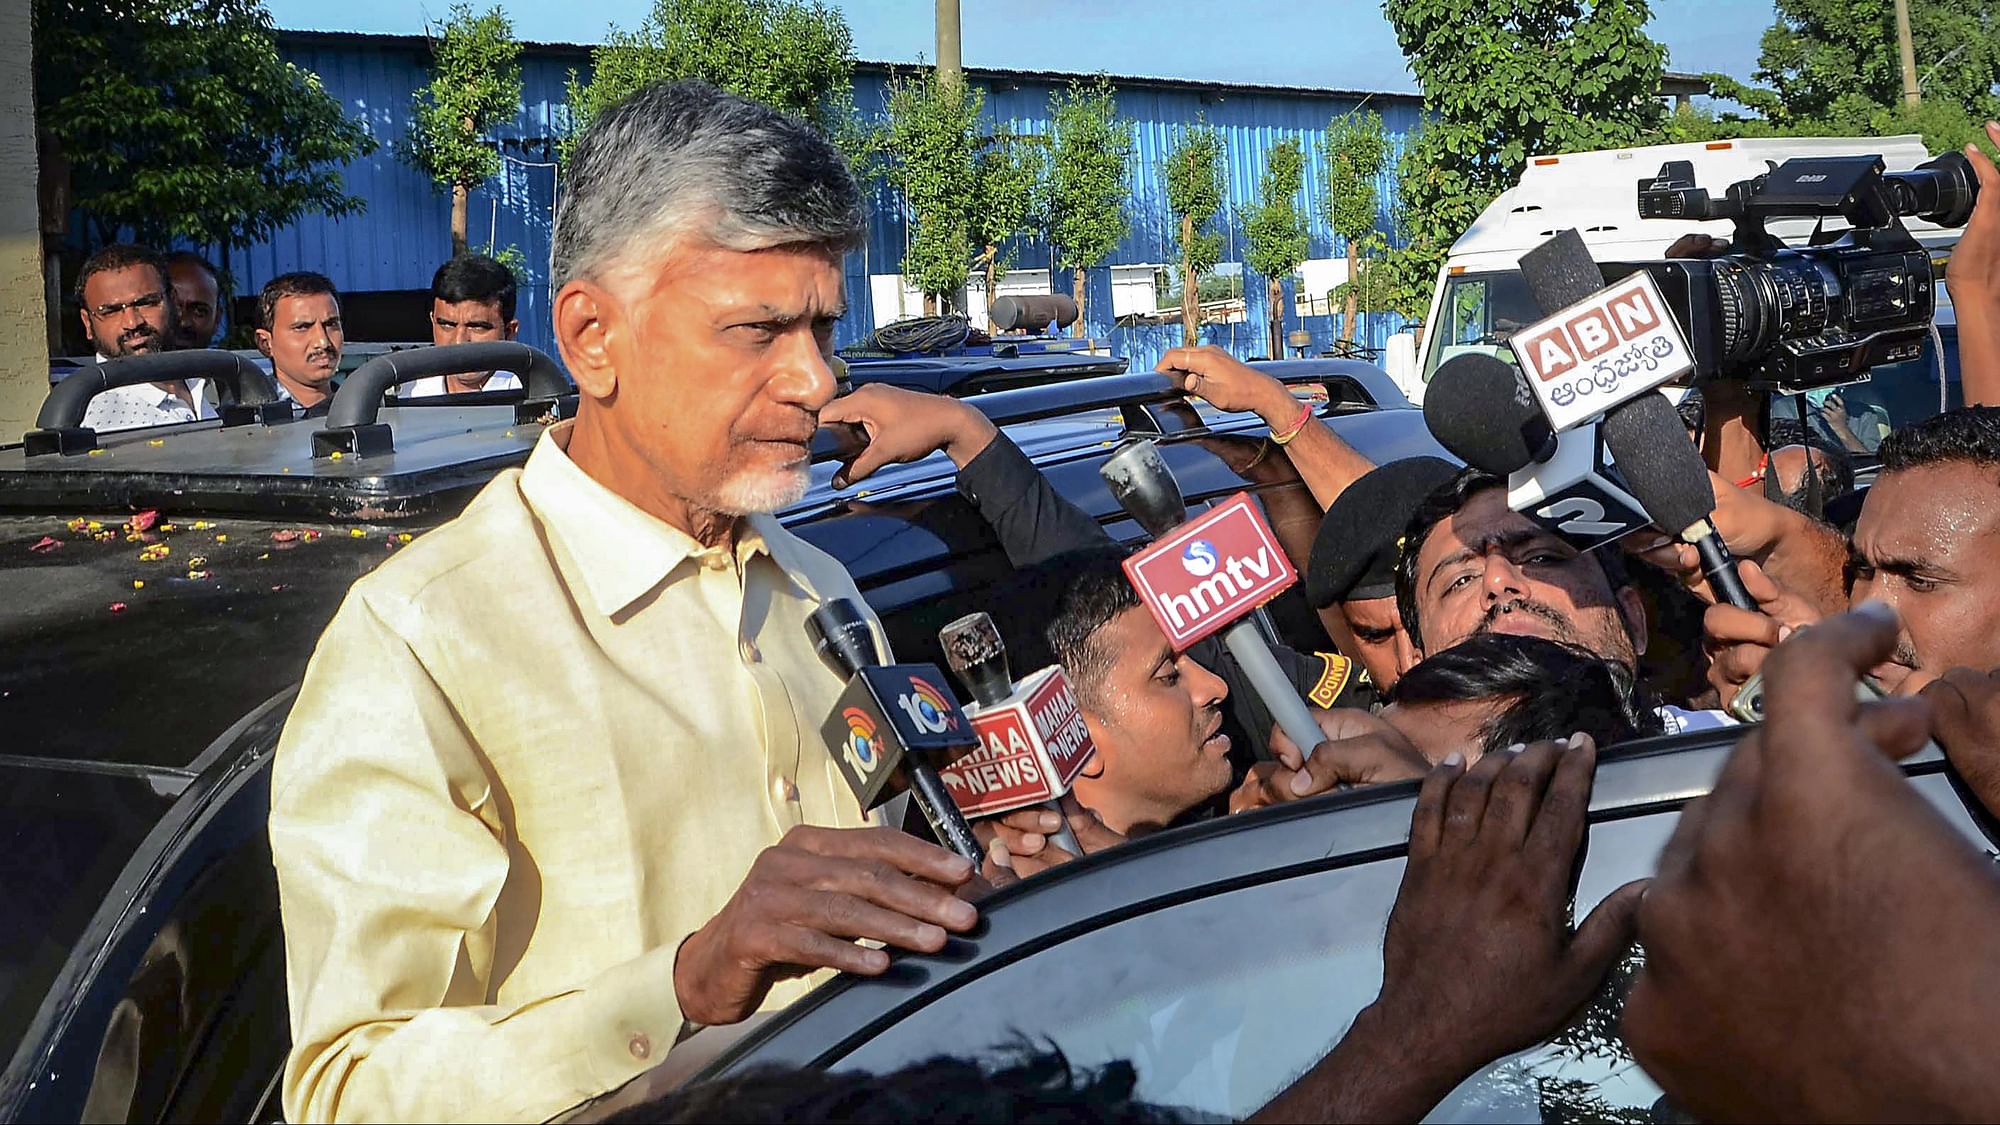 <div class="paragraphs"><p>Nandyal: Former Andhra Pradesh Chief Minister N Chandrababu Naidu being taken to Vijaywada after his arrest from Nandyal in the Skill Development Corporation scam, in Nandyal district.</p></div>